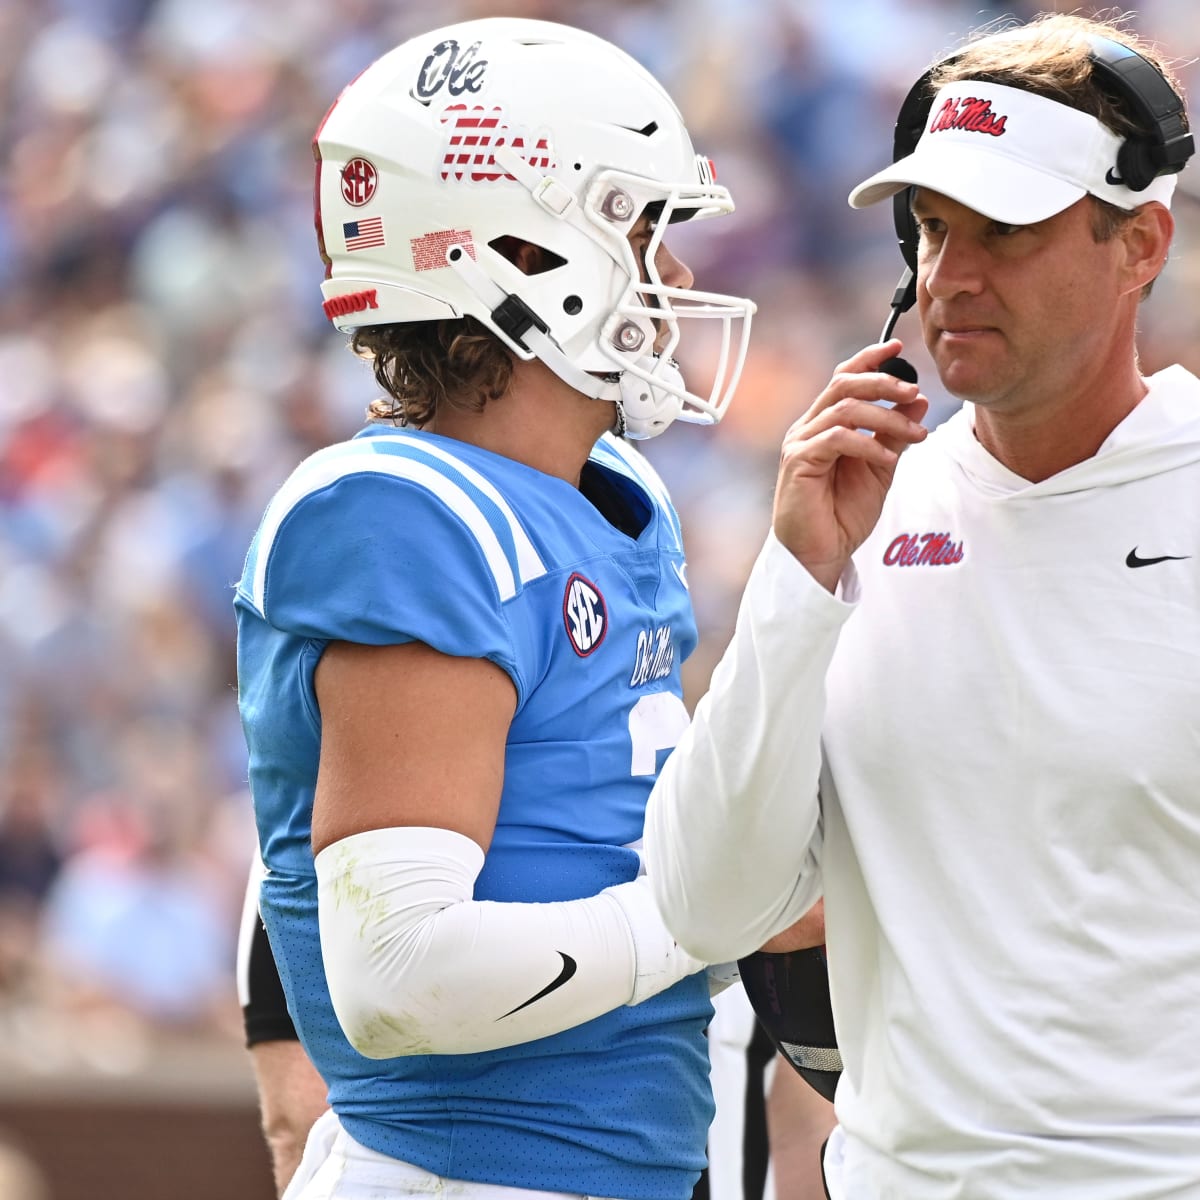 McCormick Named to SEC Community Service Team - Ole Miss News